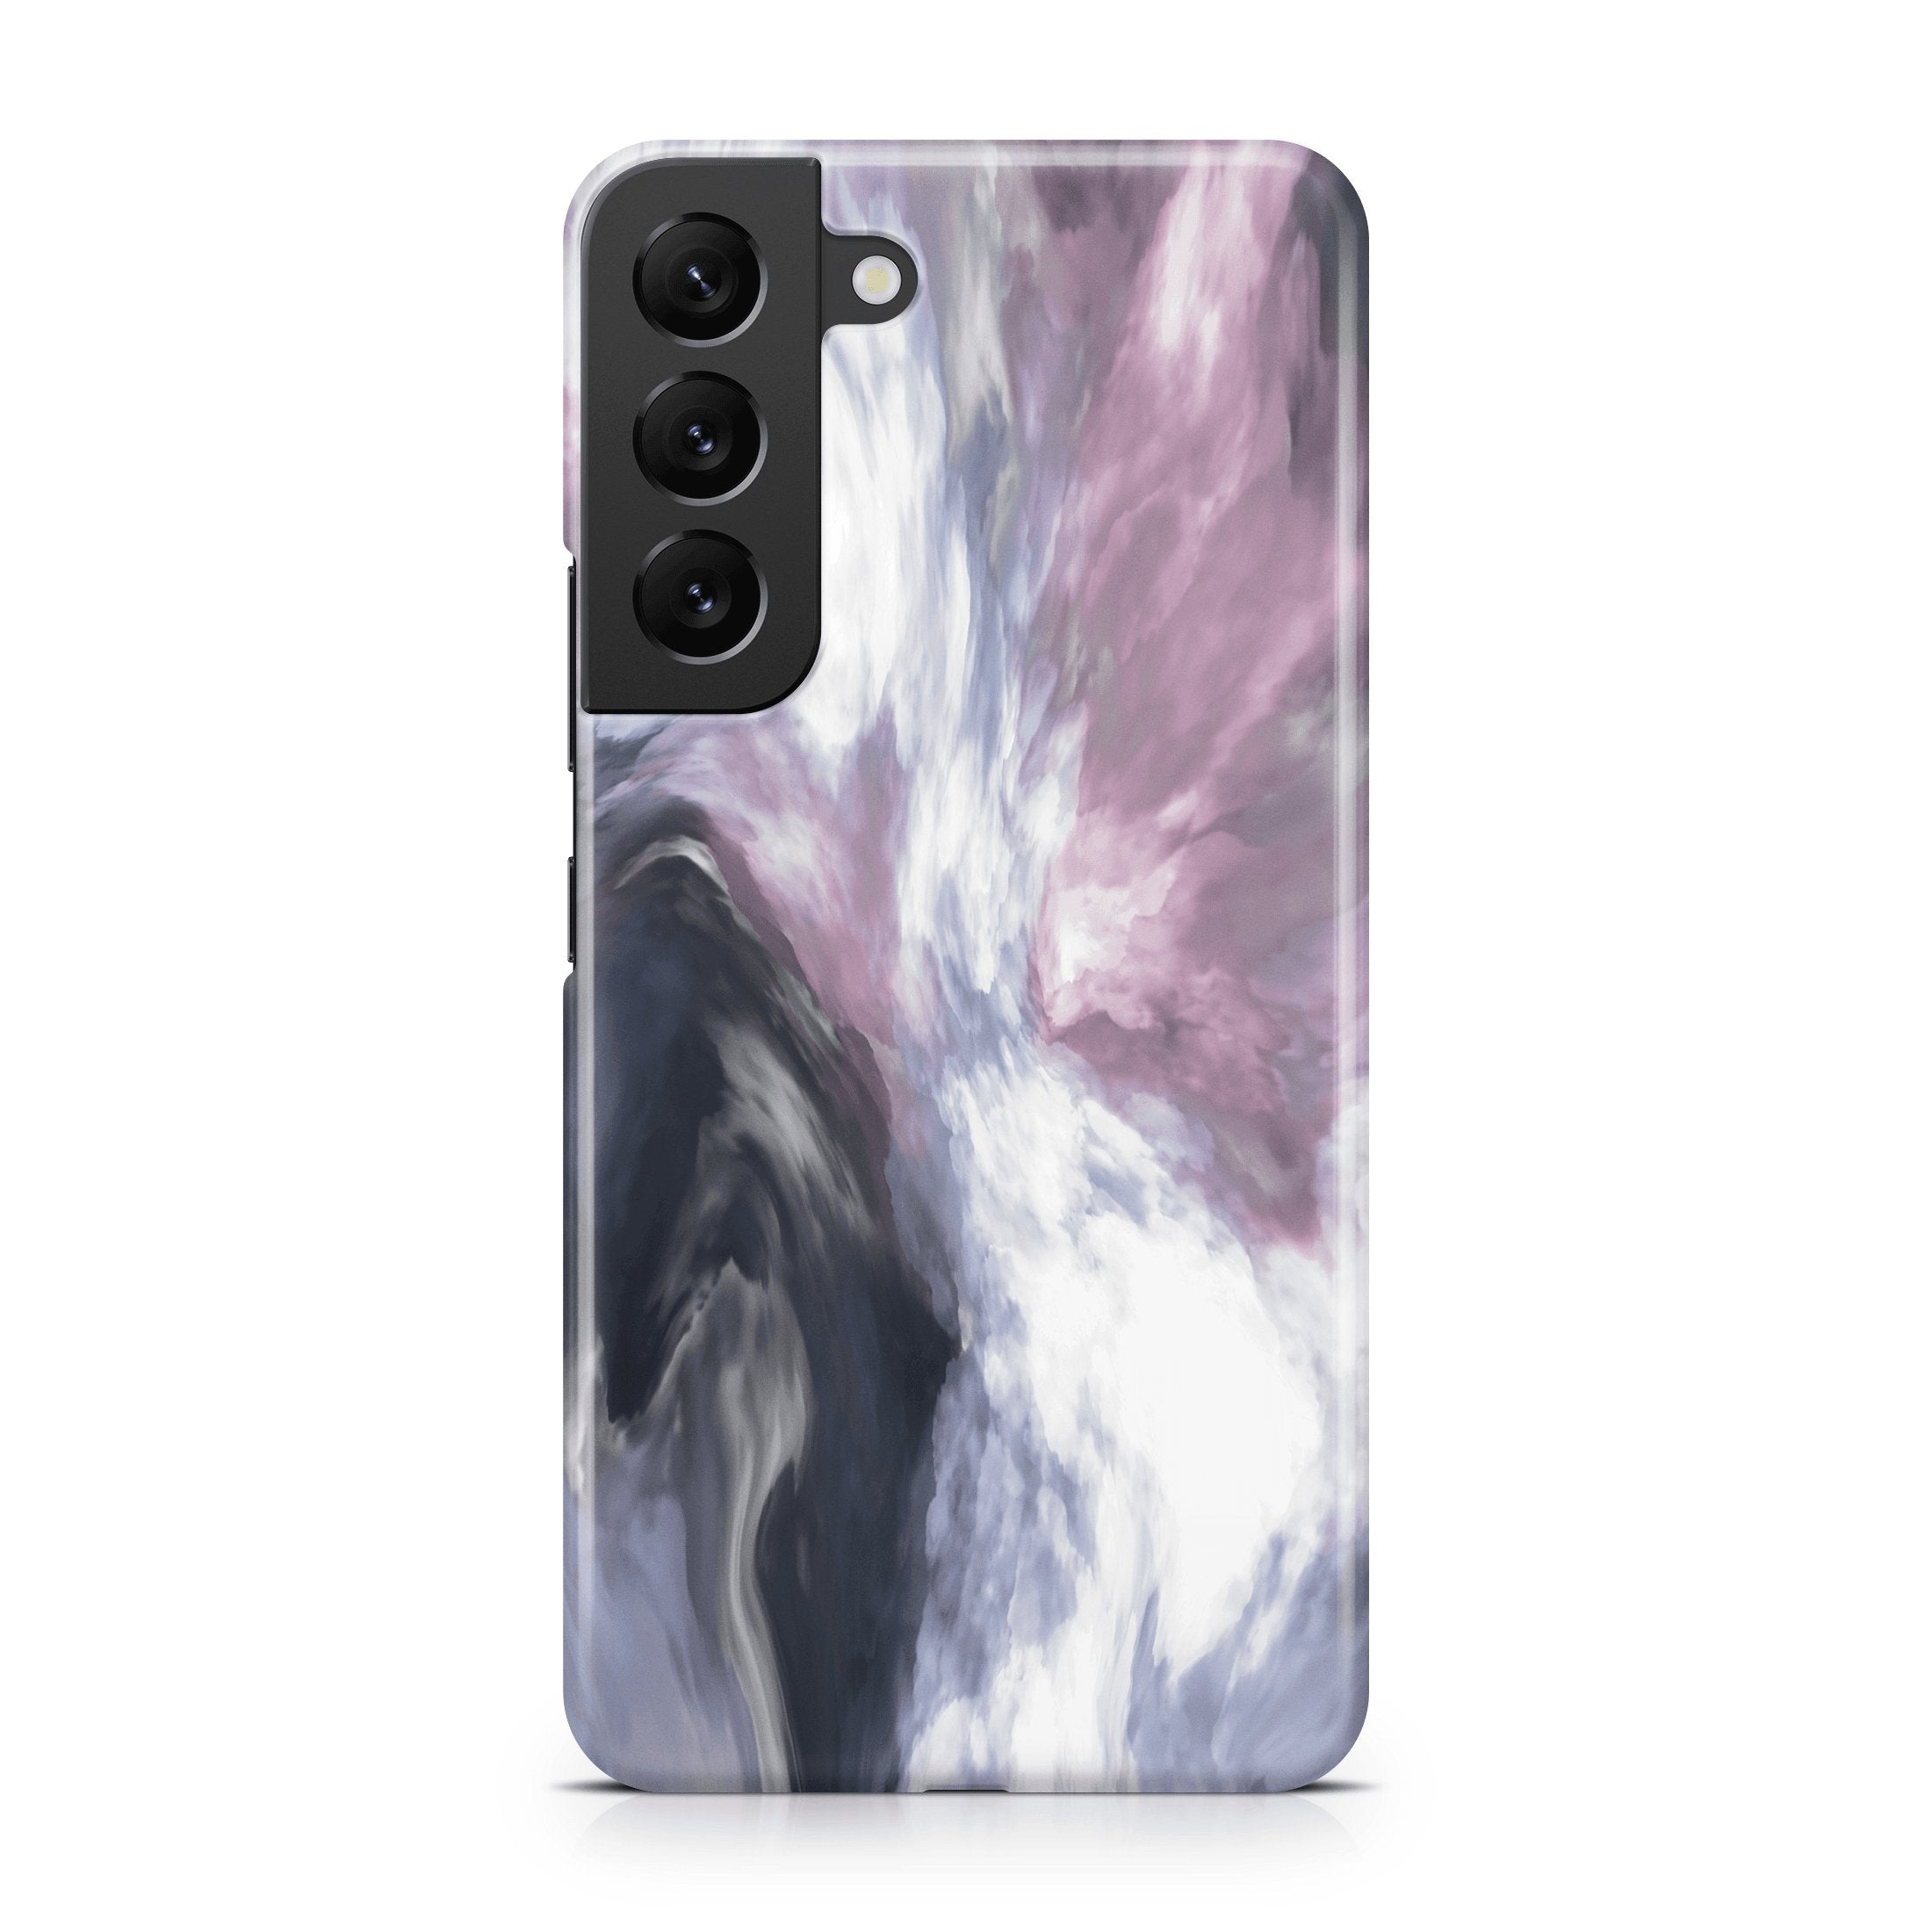 Eye of the Storm - Samsung phone case designs by CaseSwagger